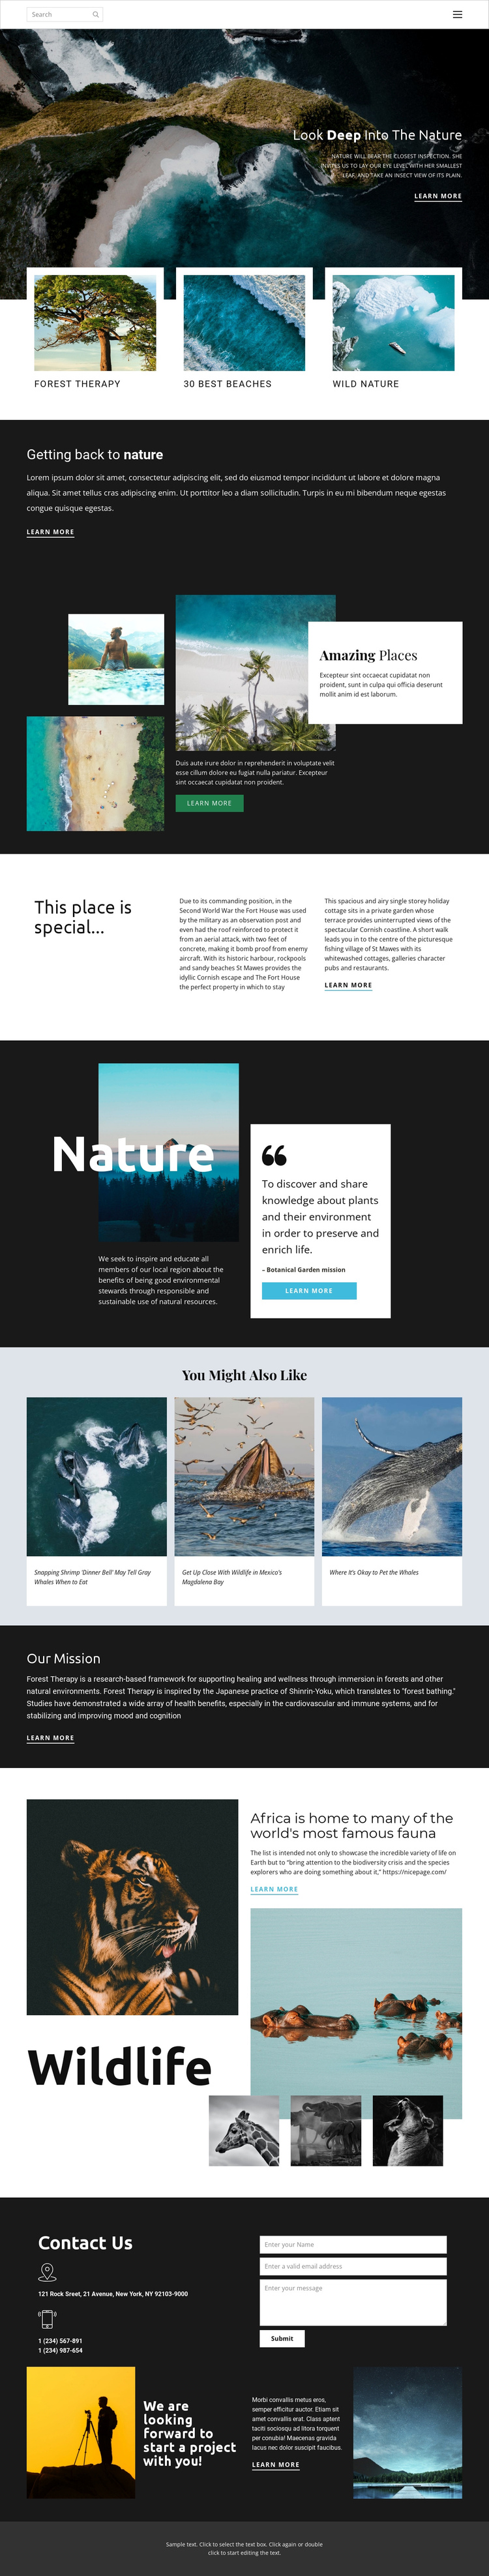 Exploring wildlife and nature One Page Template